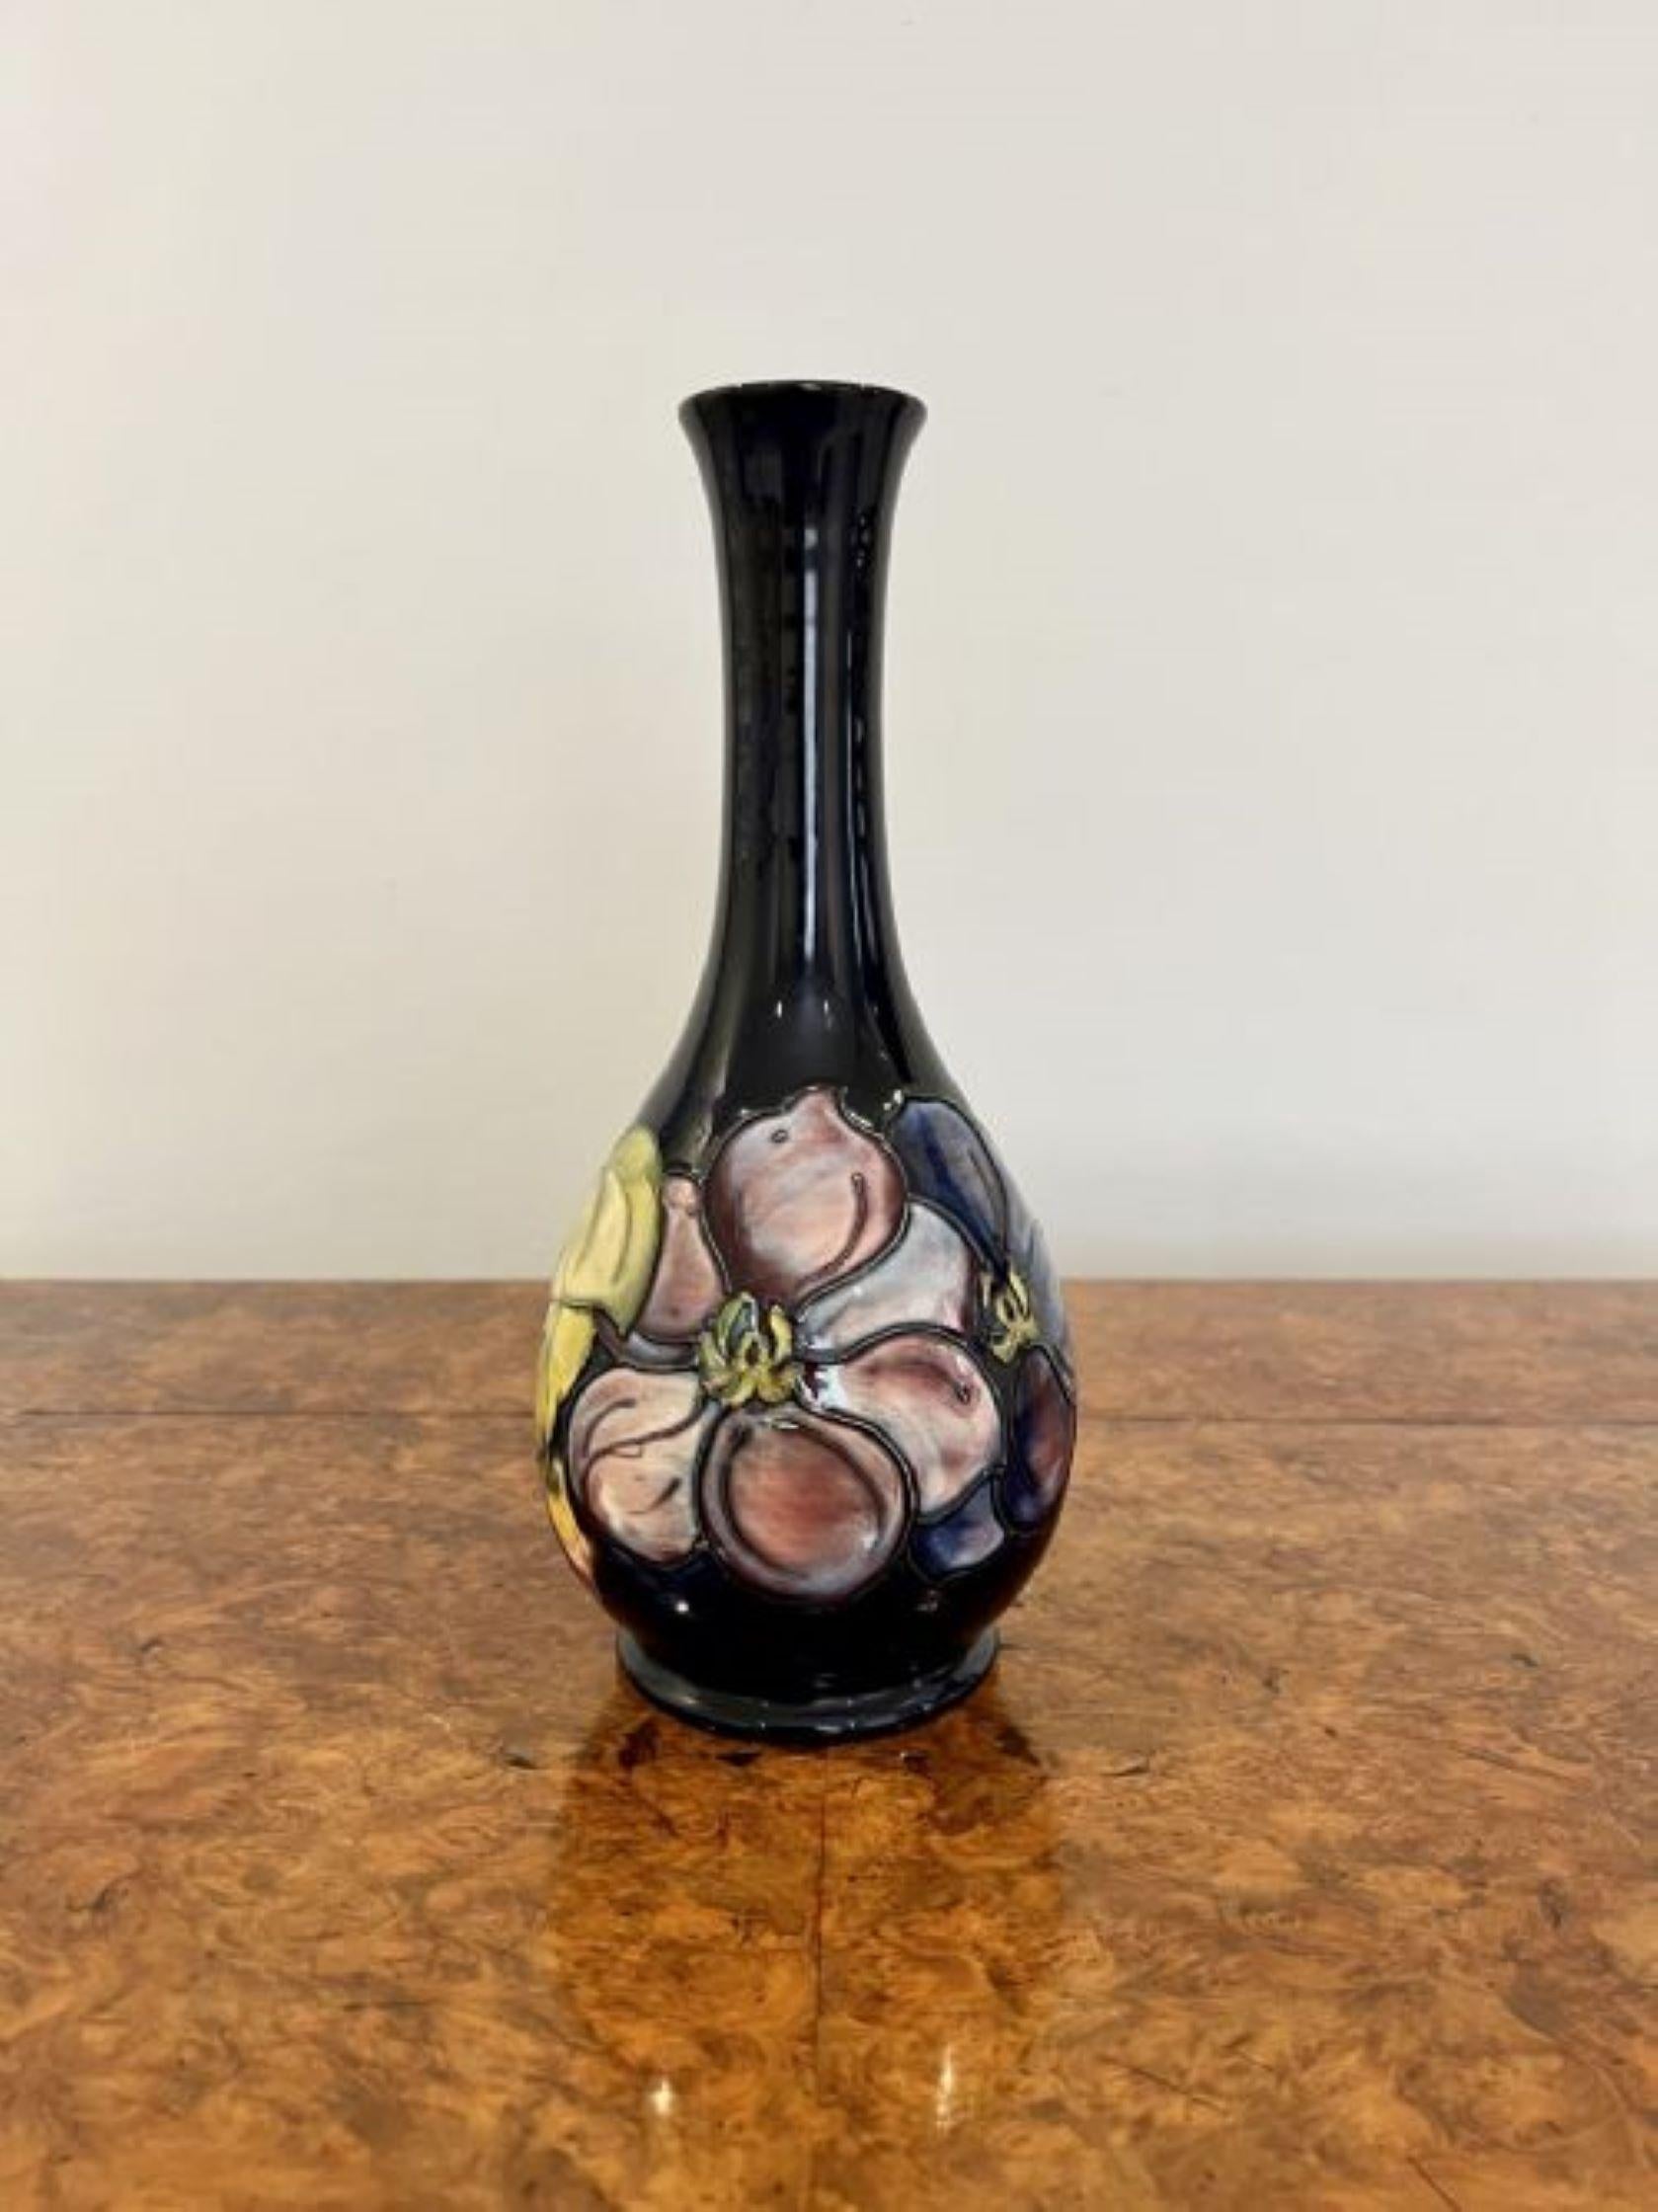 Stunning antique quality Moorcroft vase having a quality antique Moorcroft vase decorated with flowers in wonderful pink, yellow and blue colours on a navy blue background. Signature to the base as shown. 